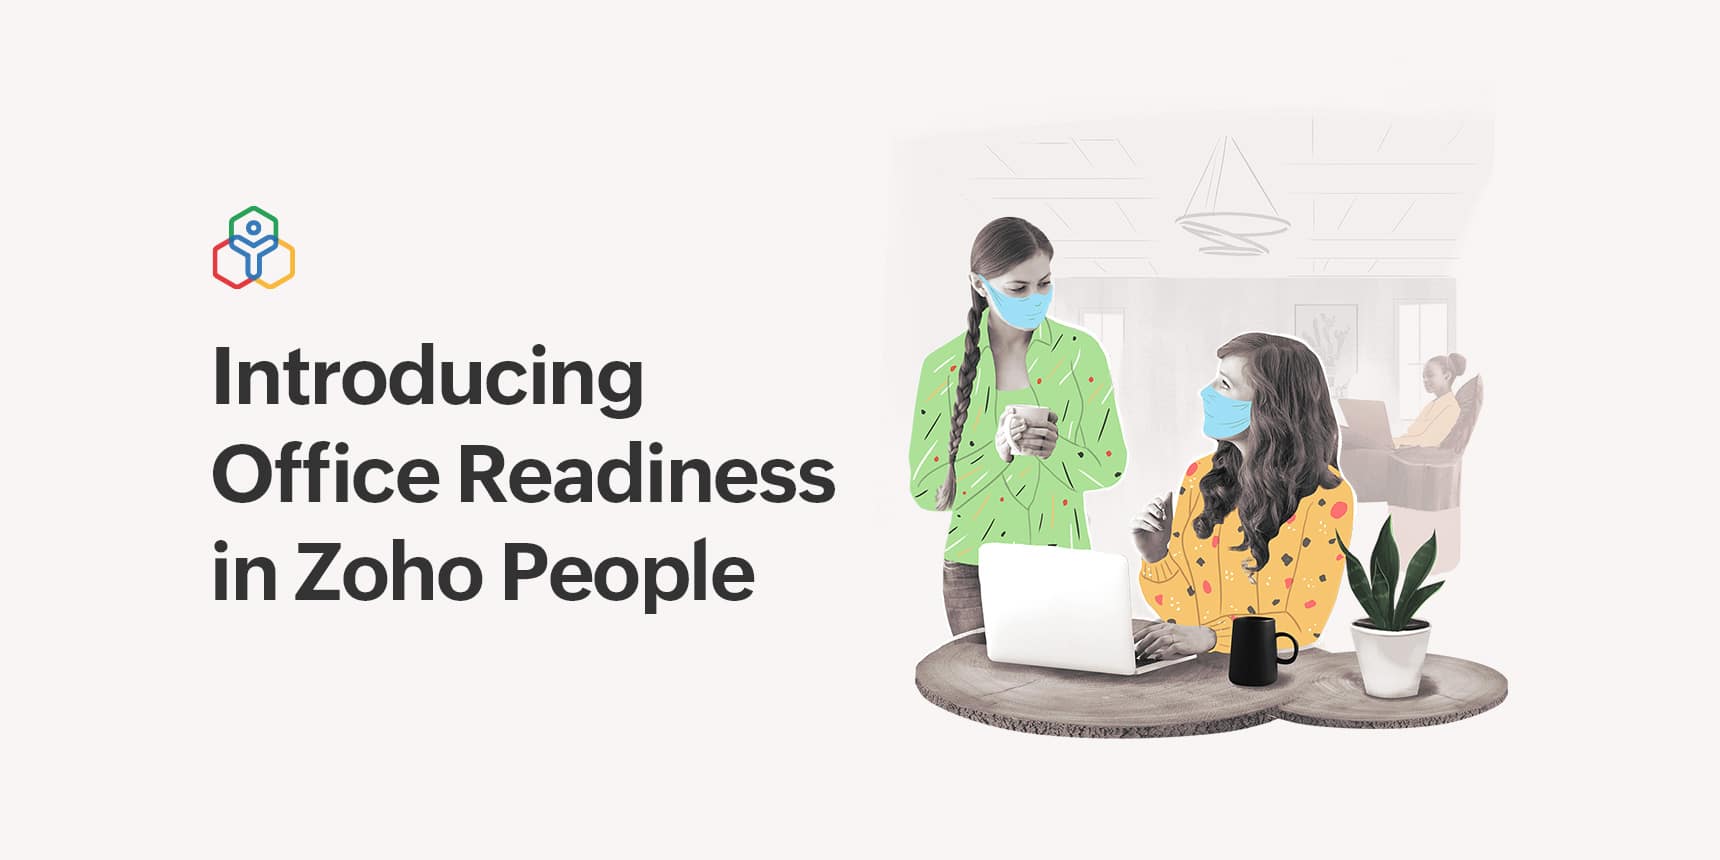 Office Readiness in Zoho People